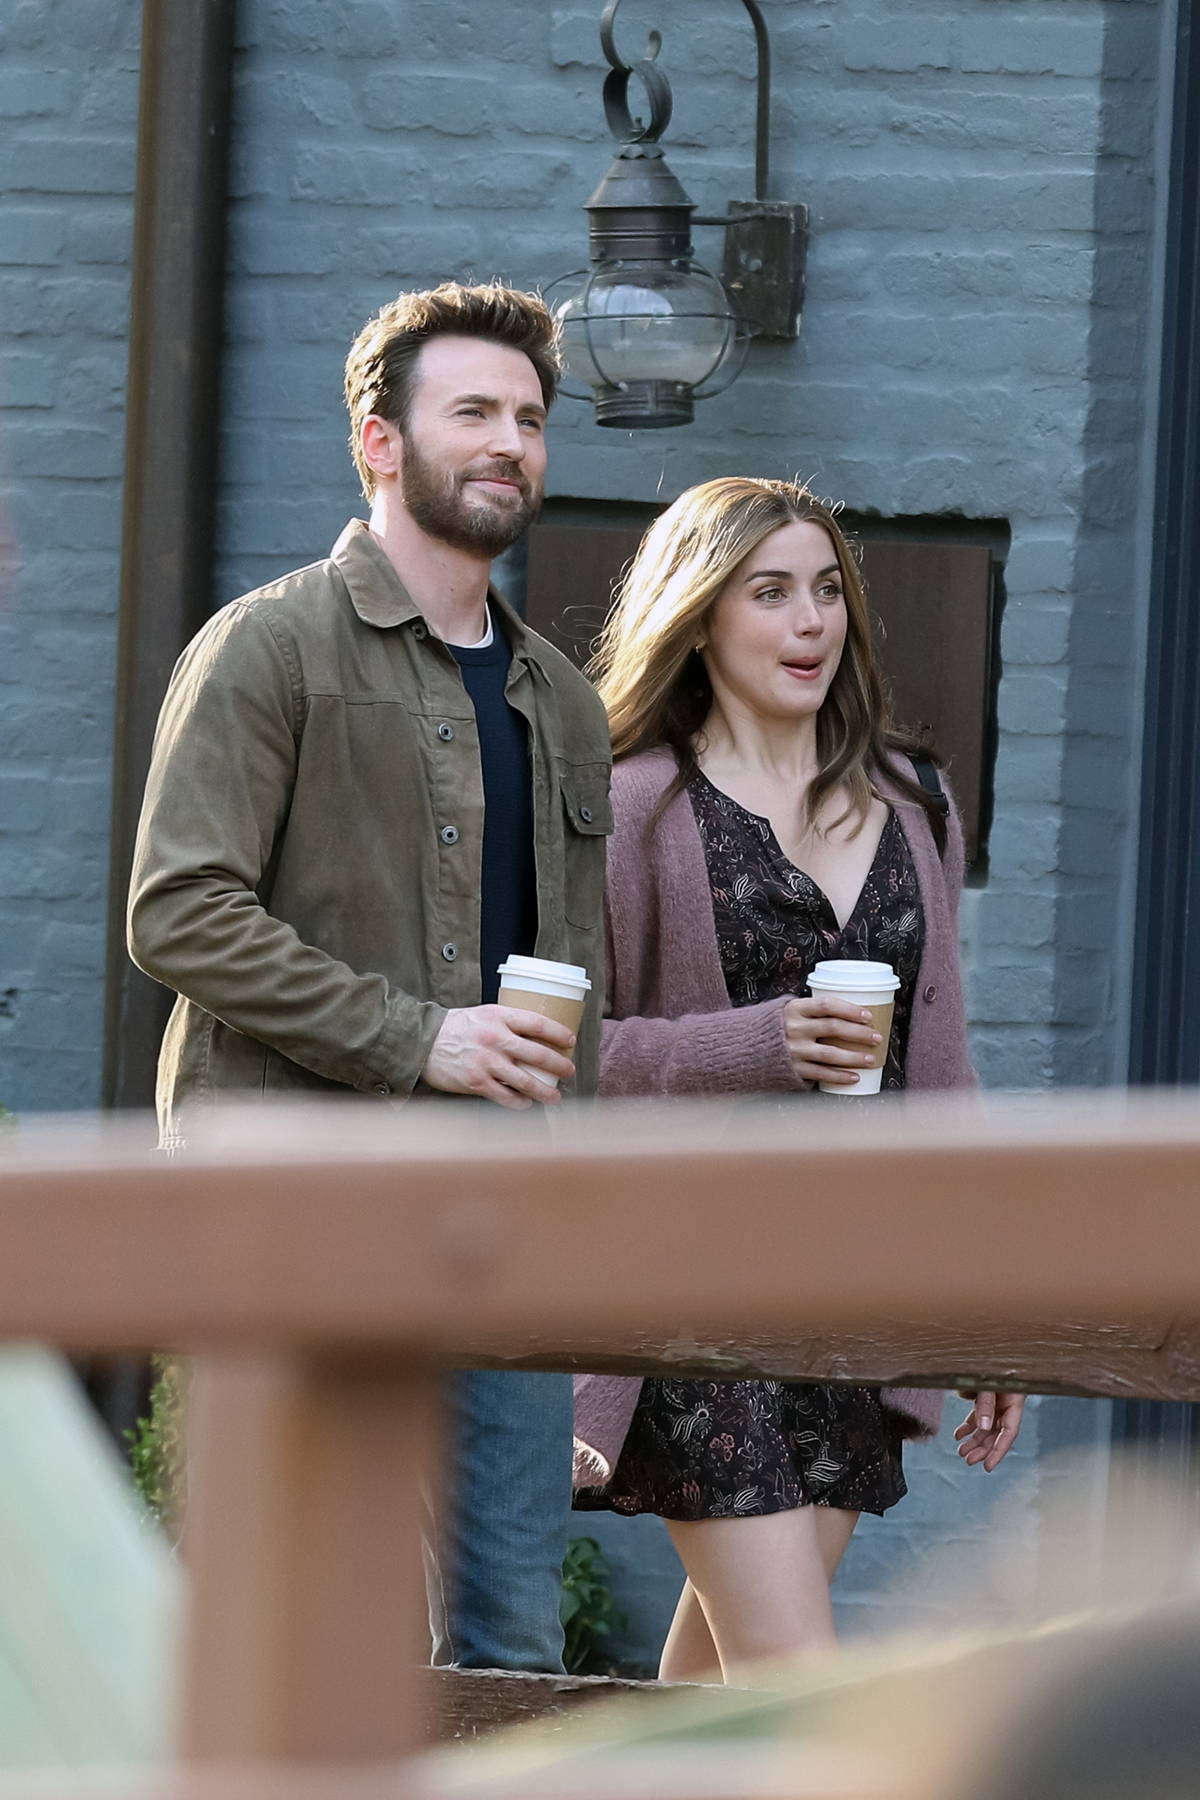 Ana de Armas chic in black suit as she is joined by Chris Evans while doing  press rounds for Ghosted